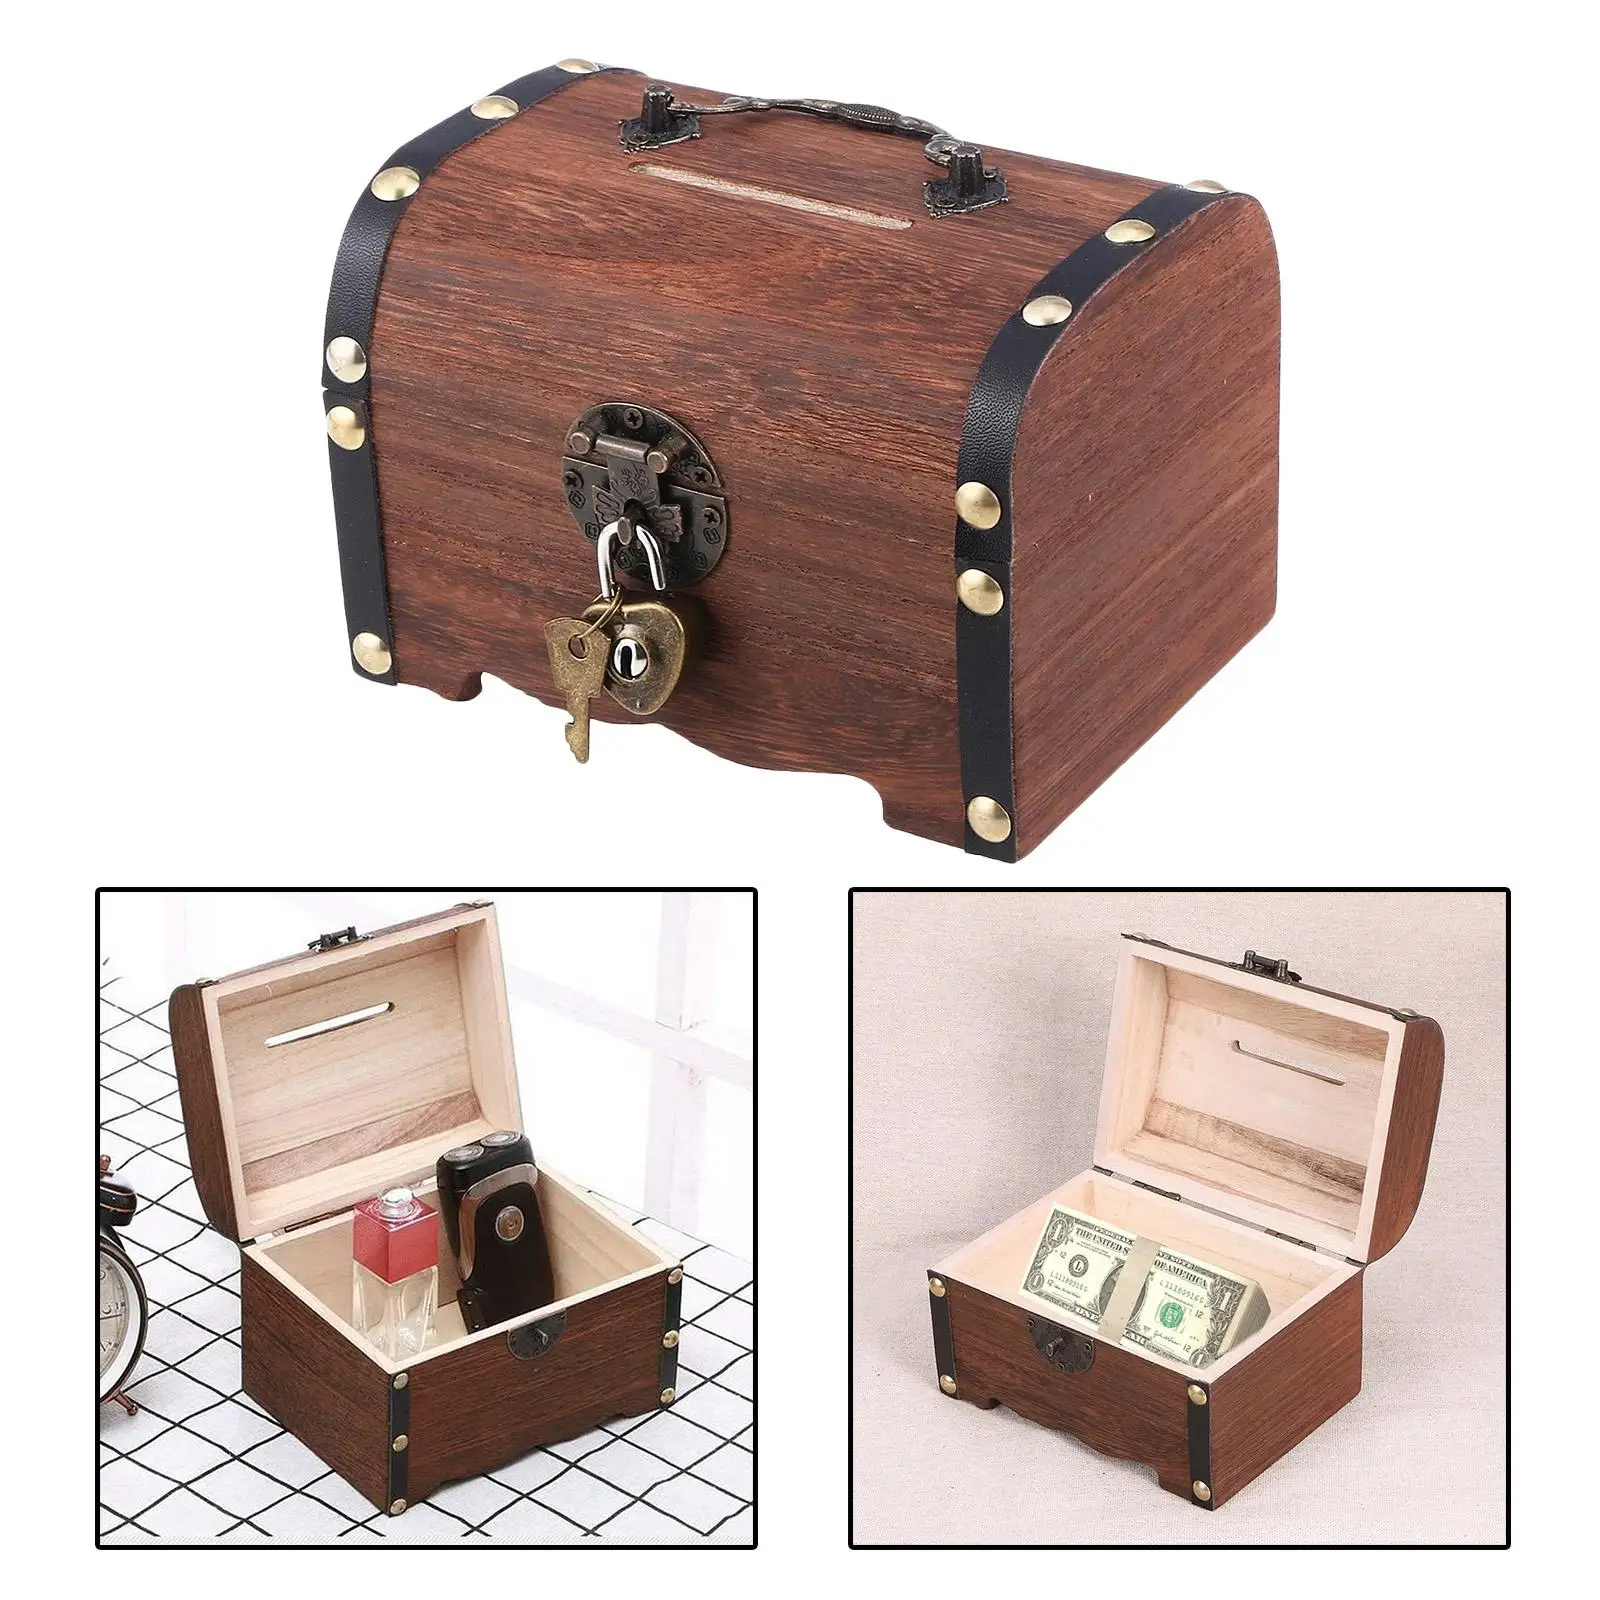 Retro Wooden Box, Vintage Wooden Vintage Coin Box Organizer with Lock & Keys for Children Adults